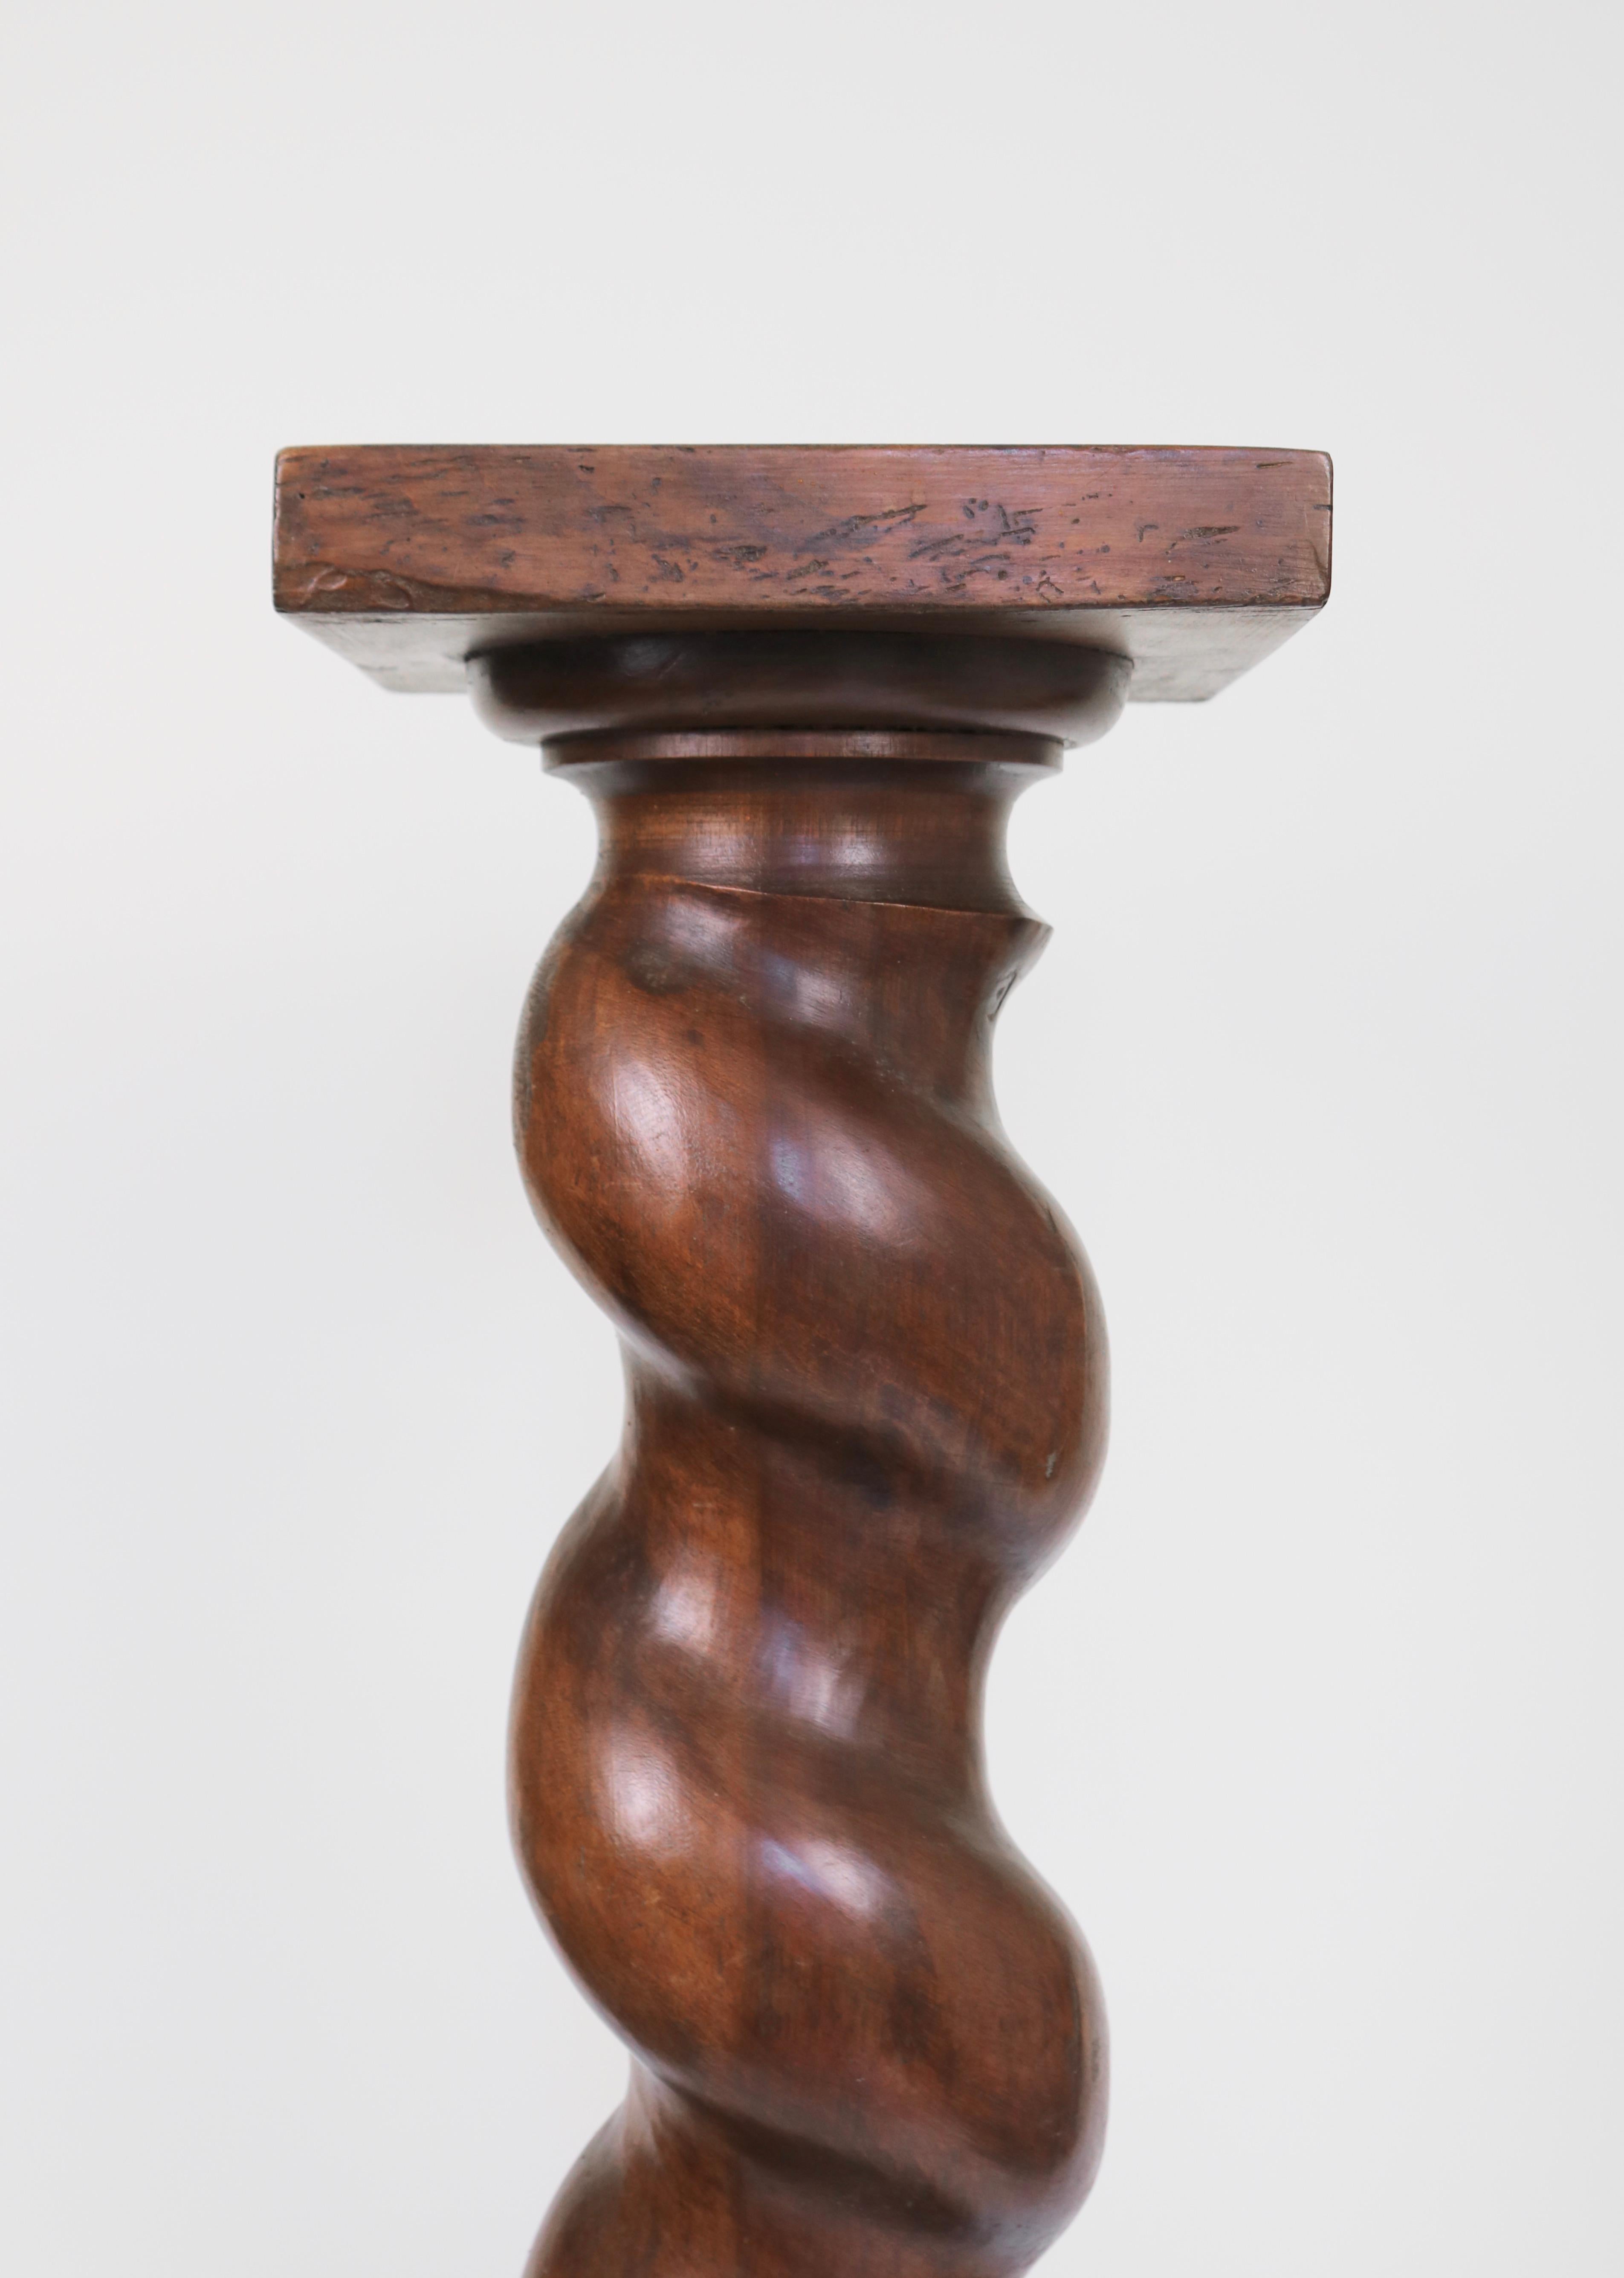 A tall pedestal with a solid walnut barley twist post and square top and bottom. A beautiful piece of French design in excellent vintage condition.

The walnut is rich and deep in colour.
A heavy and sturdy base that can hold weight.